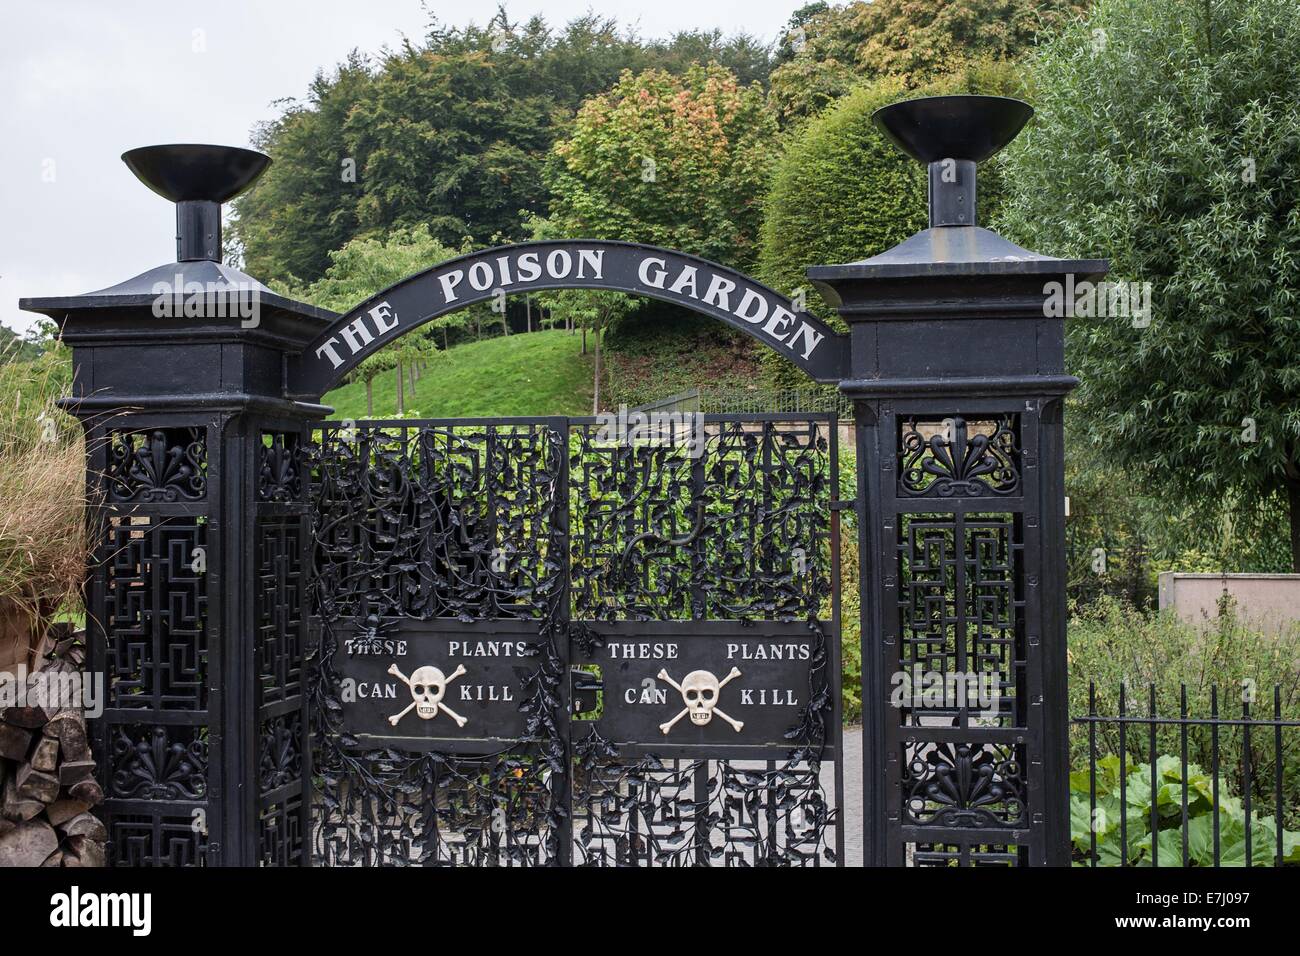 The gates and entrance to the Alnwick Poison Garden in Northumberland England UK Stock Photo